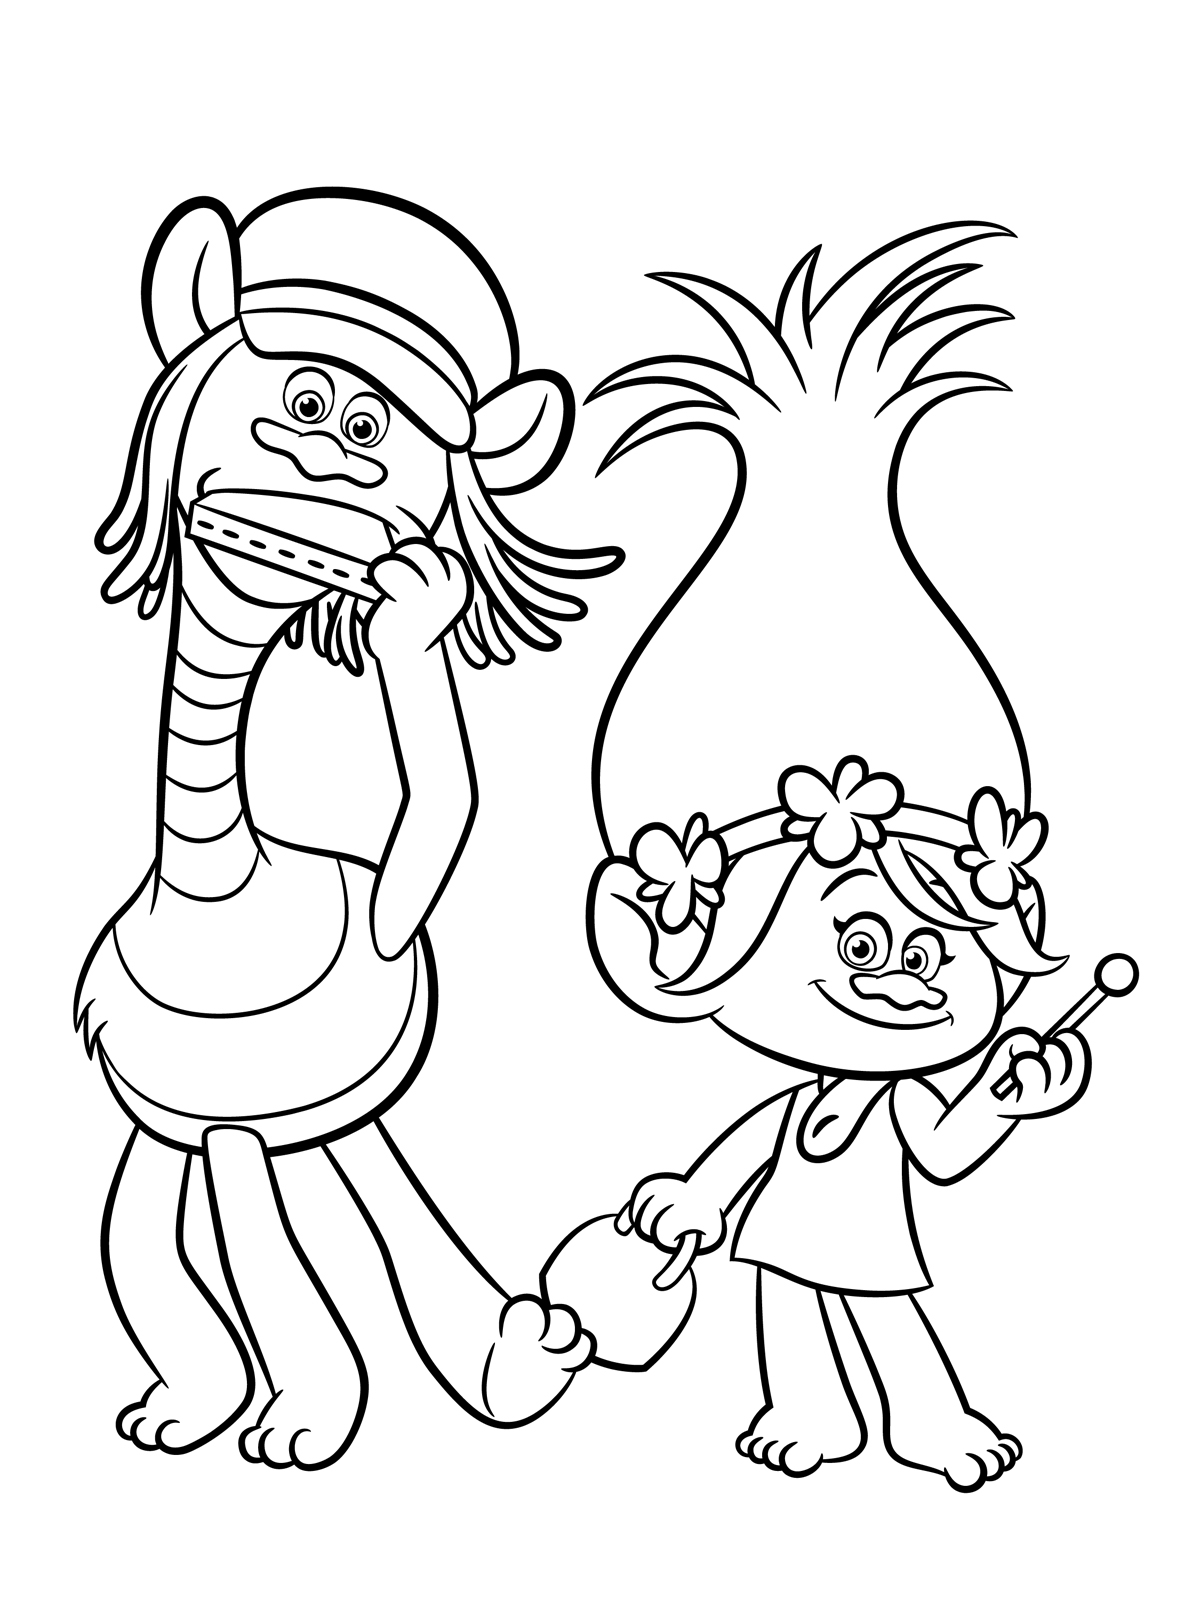 trolls-coloring-pages-to-download-and-print-for-free